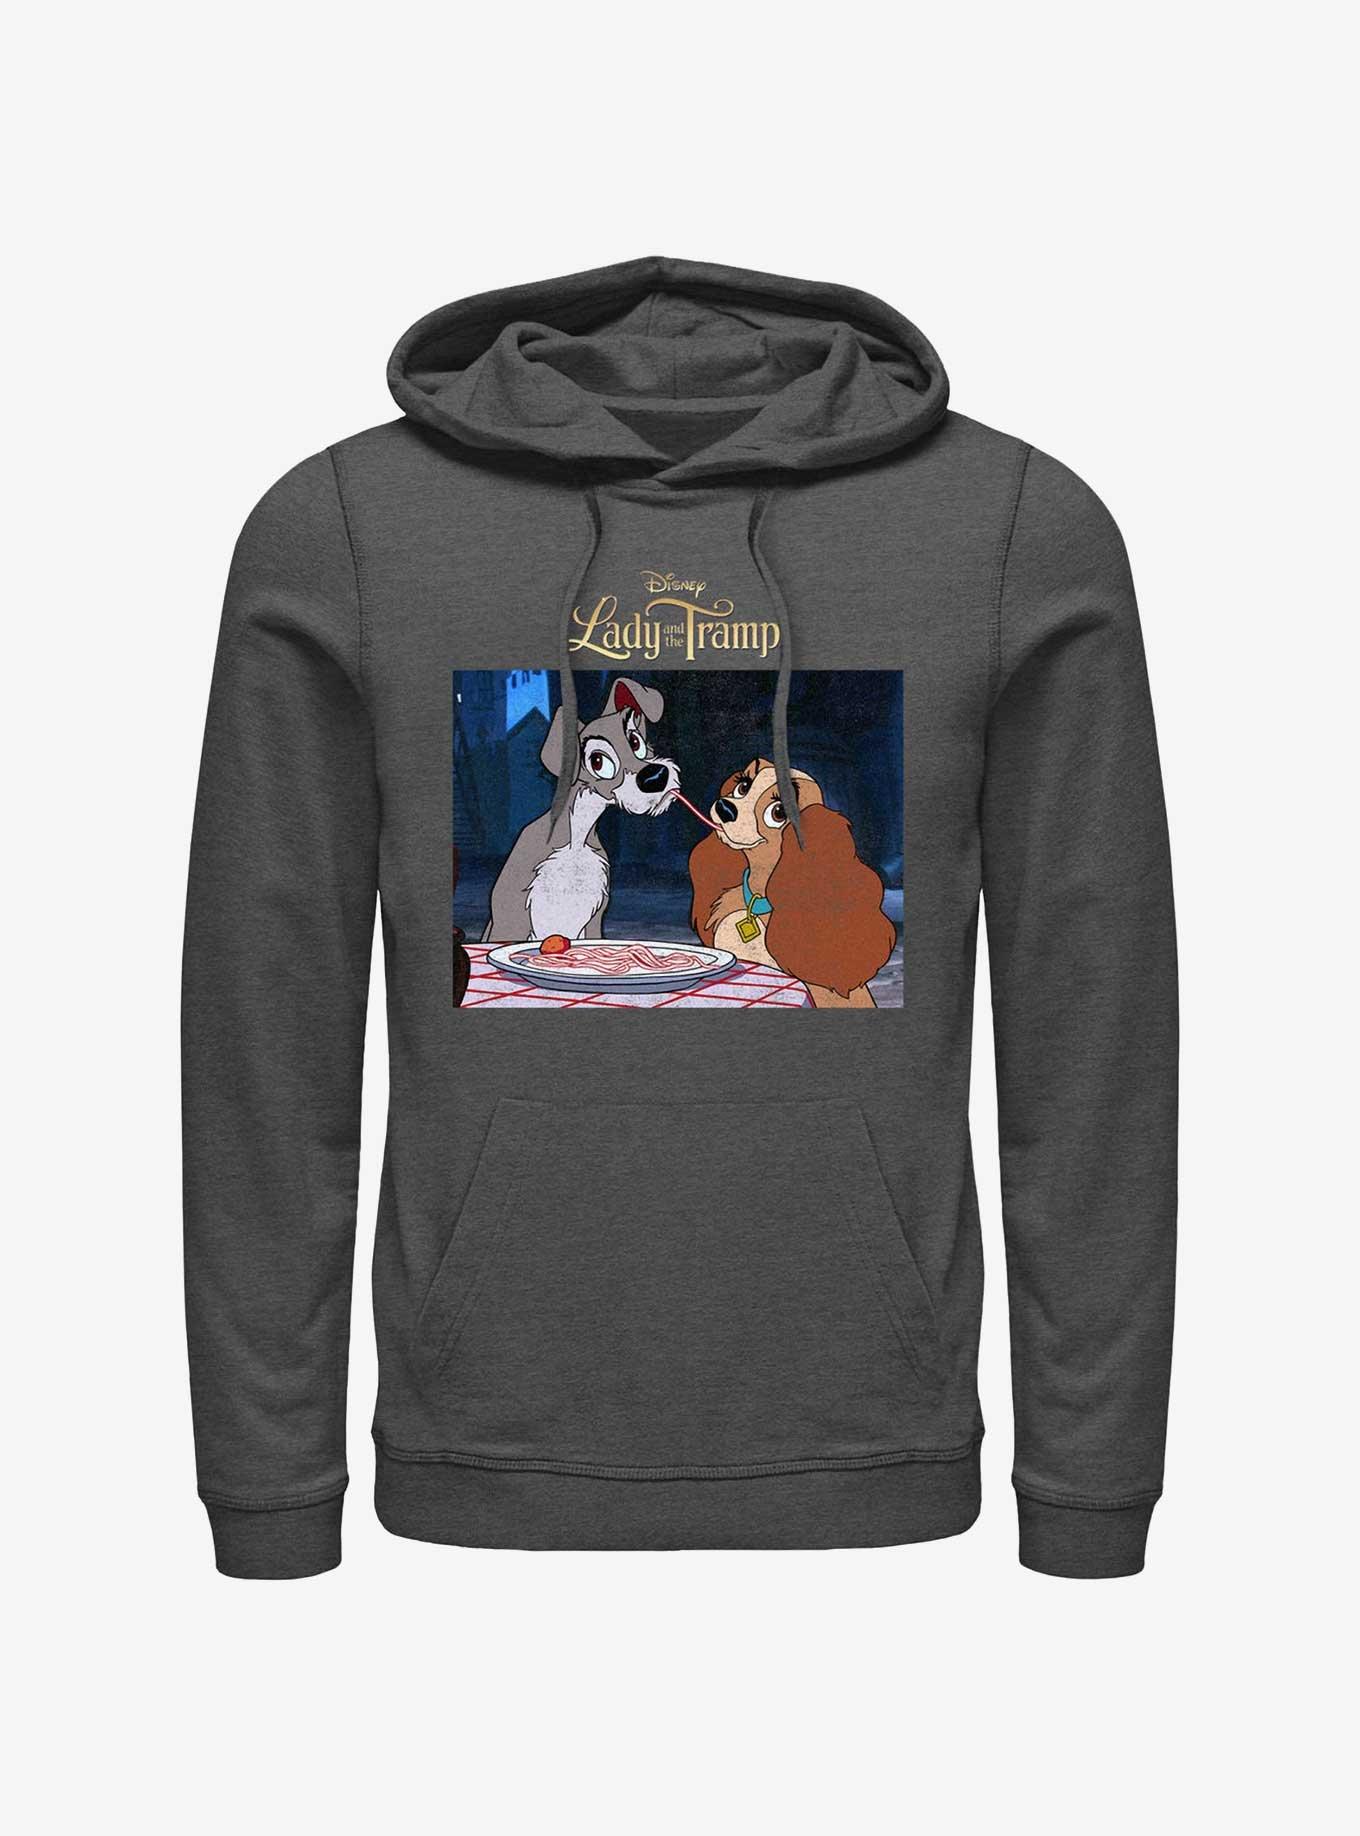 Disney Lady and the Tramp Share Spaghetti Hoodie, CHAR HTR, hi-res